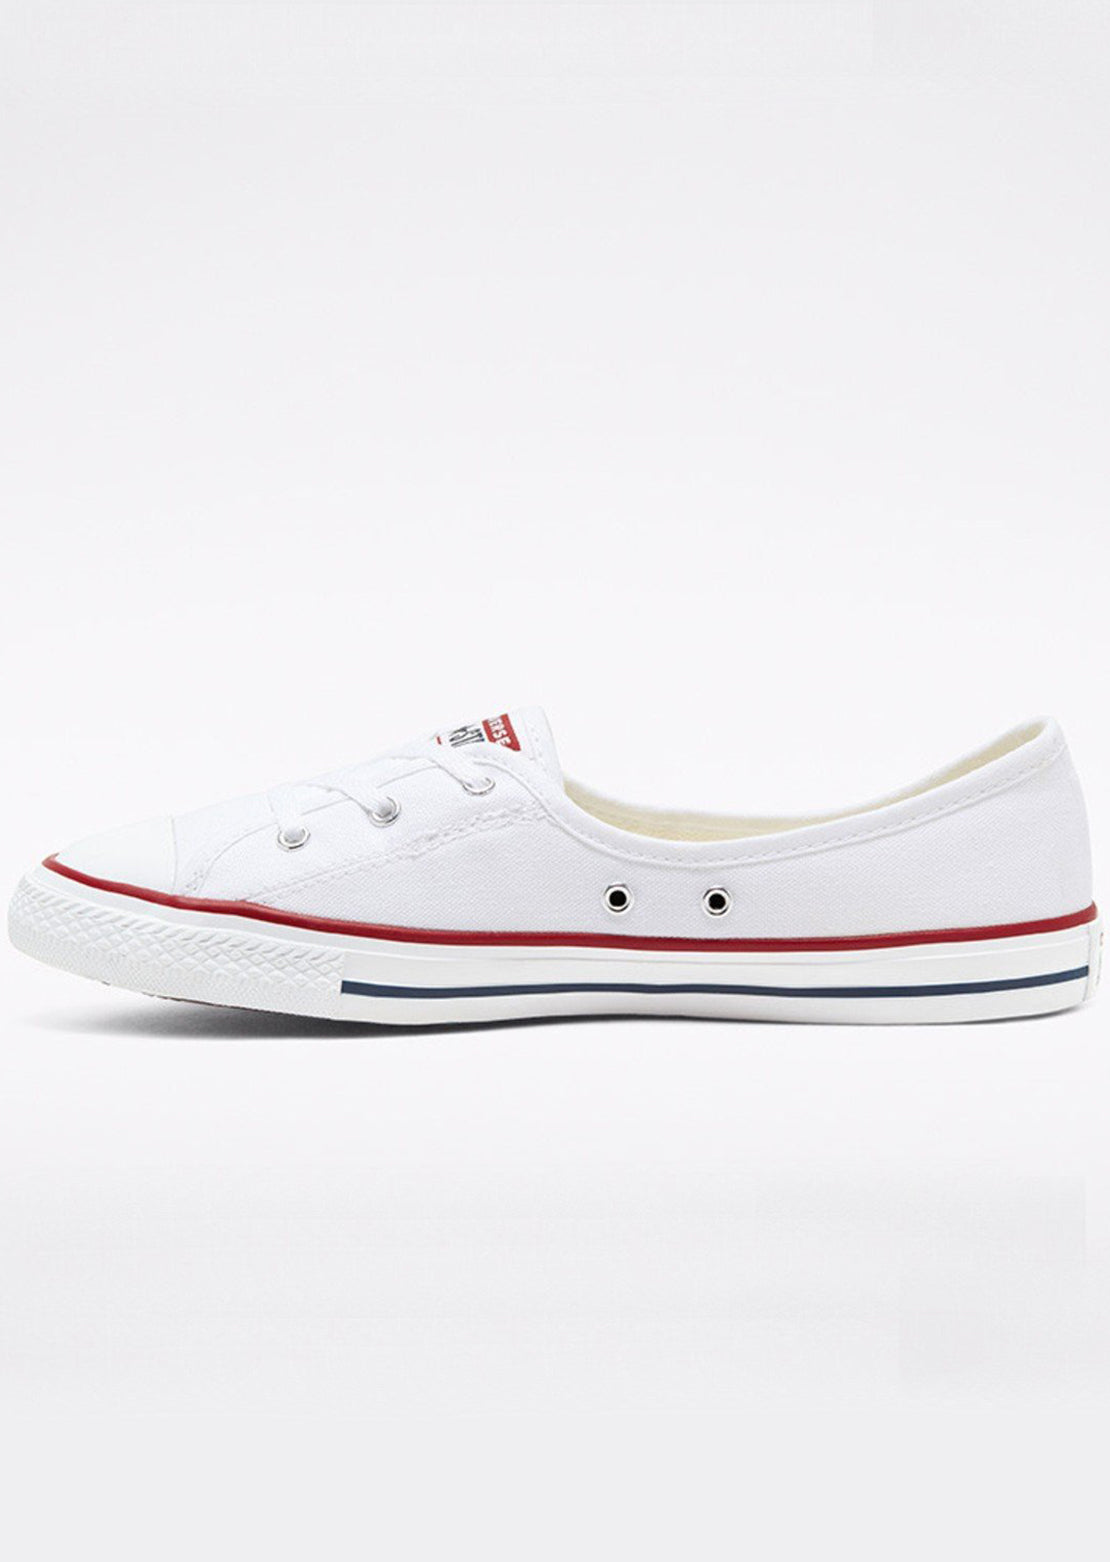 Converse Women&#39;s Chuck Taylor All Star Ballet Lace Slip-On Shoes White/Garnet/Navy